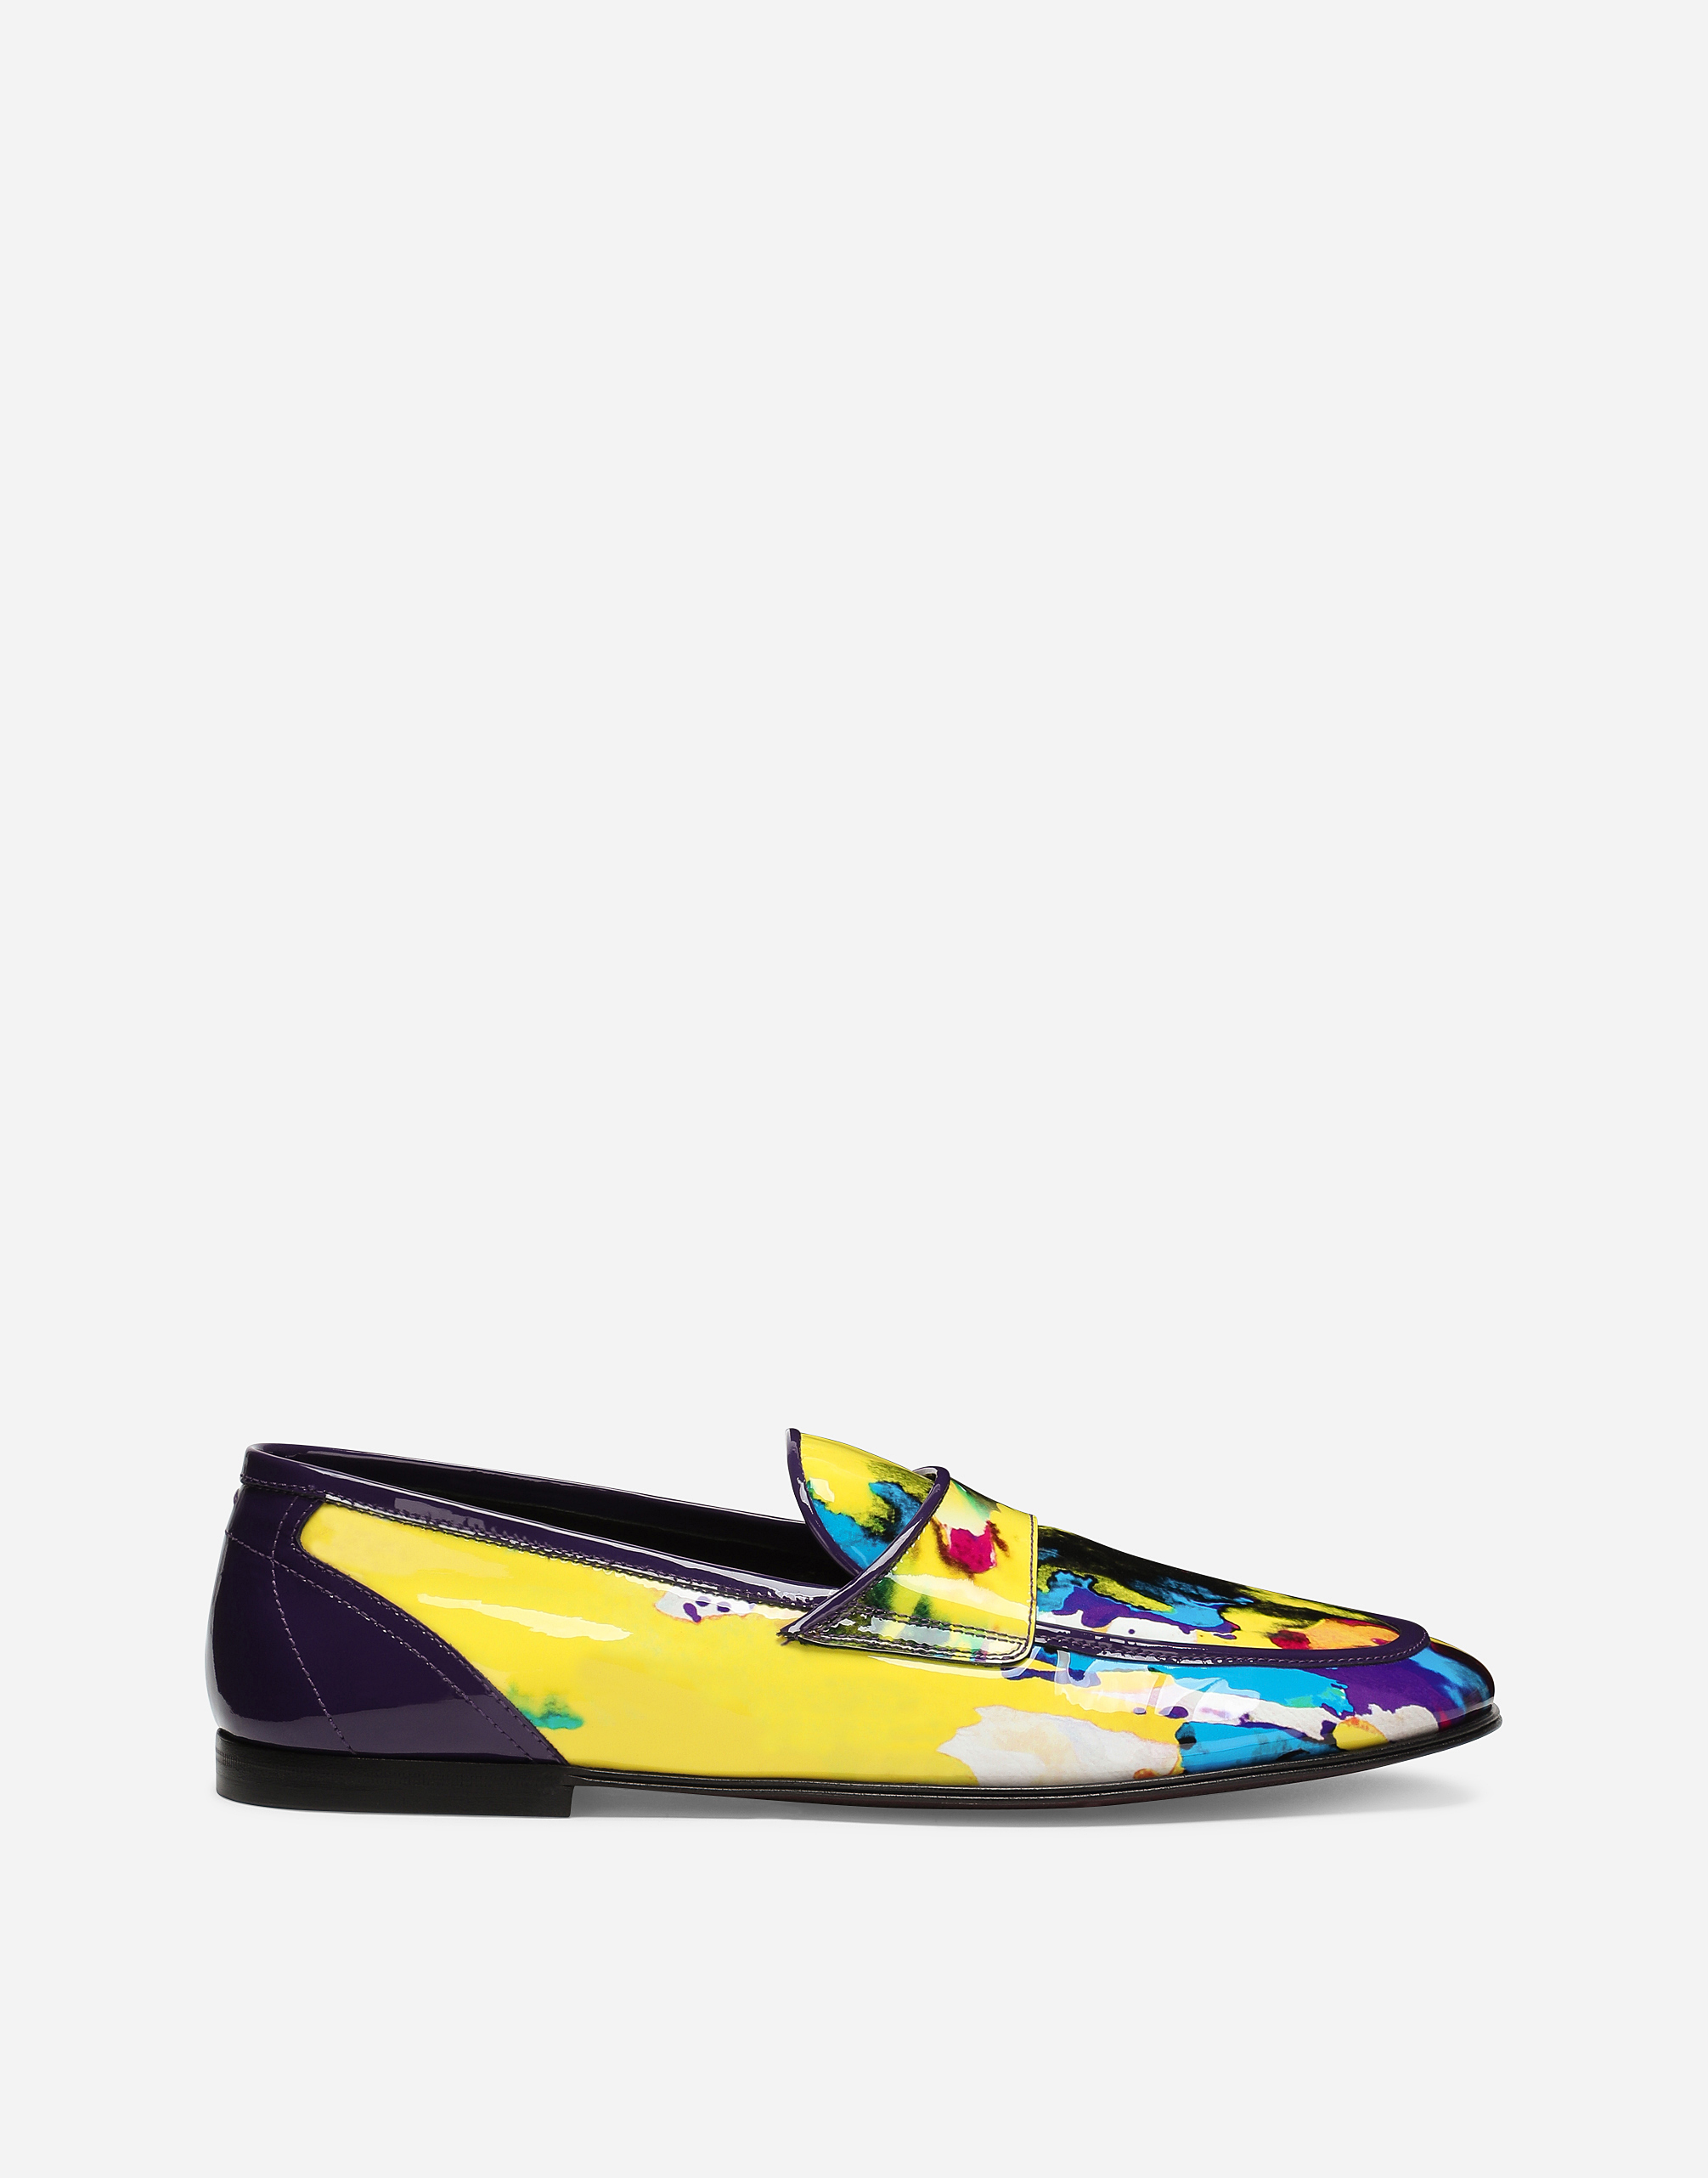 Patent calfskin Ariosto slippers with tie-dye effect in Multicolor